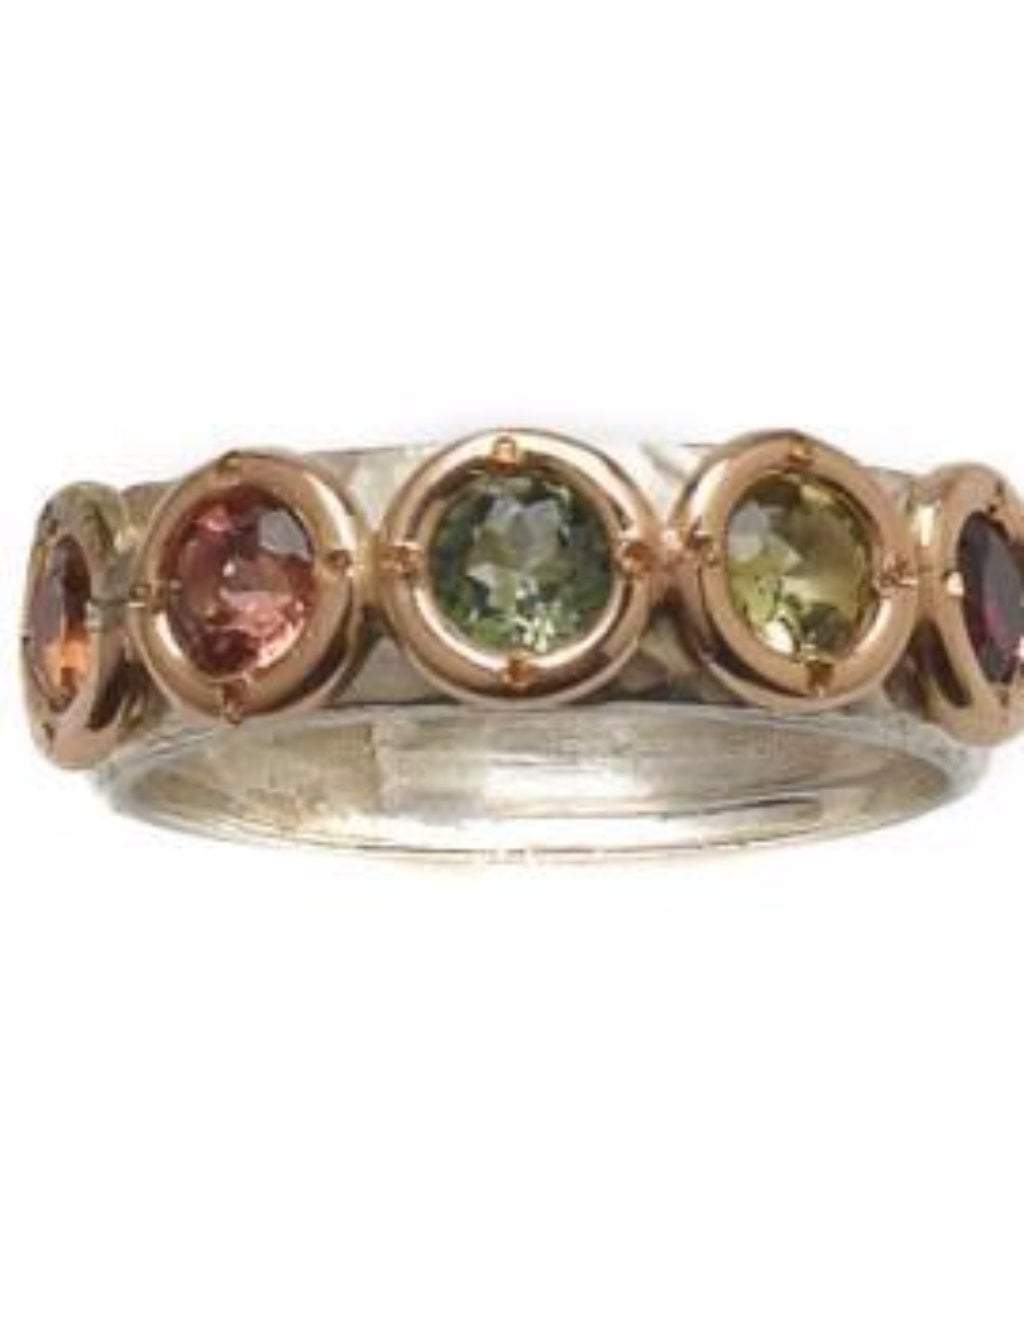 Bluenoemi Jewelry Rings 5 / silver gold Sterling Silver and 9 carats Gold Designer Ring set with Tourmalines.